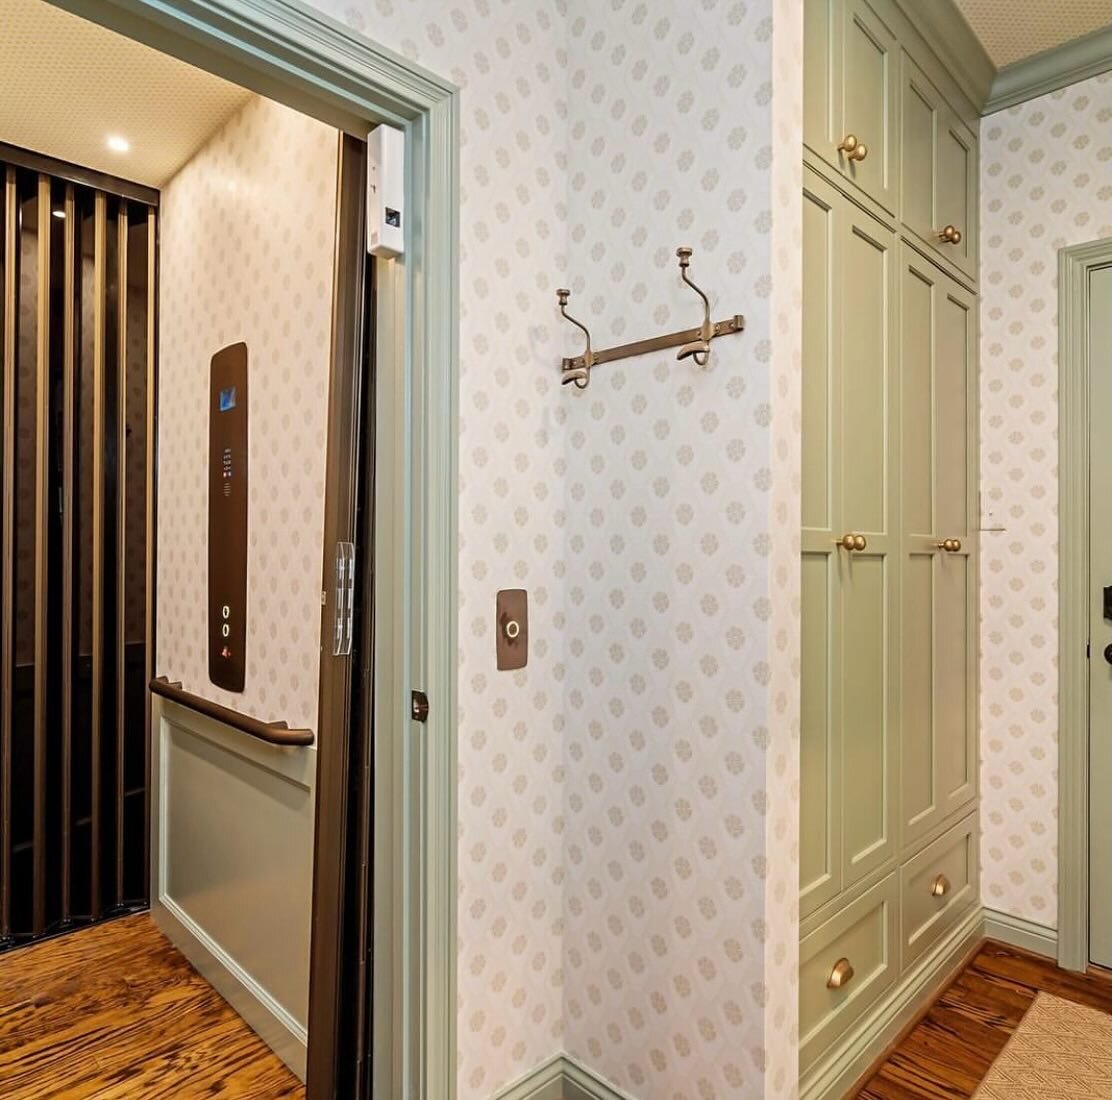 Going up? 🌿
Adding an elevator is a massive undertaking in a renovation, but it allows the client to &quot;age in place&quot;, something to consider when renovating ... also much easier in a new build, especially if it's intended as a &quot;forever&